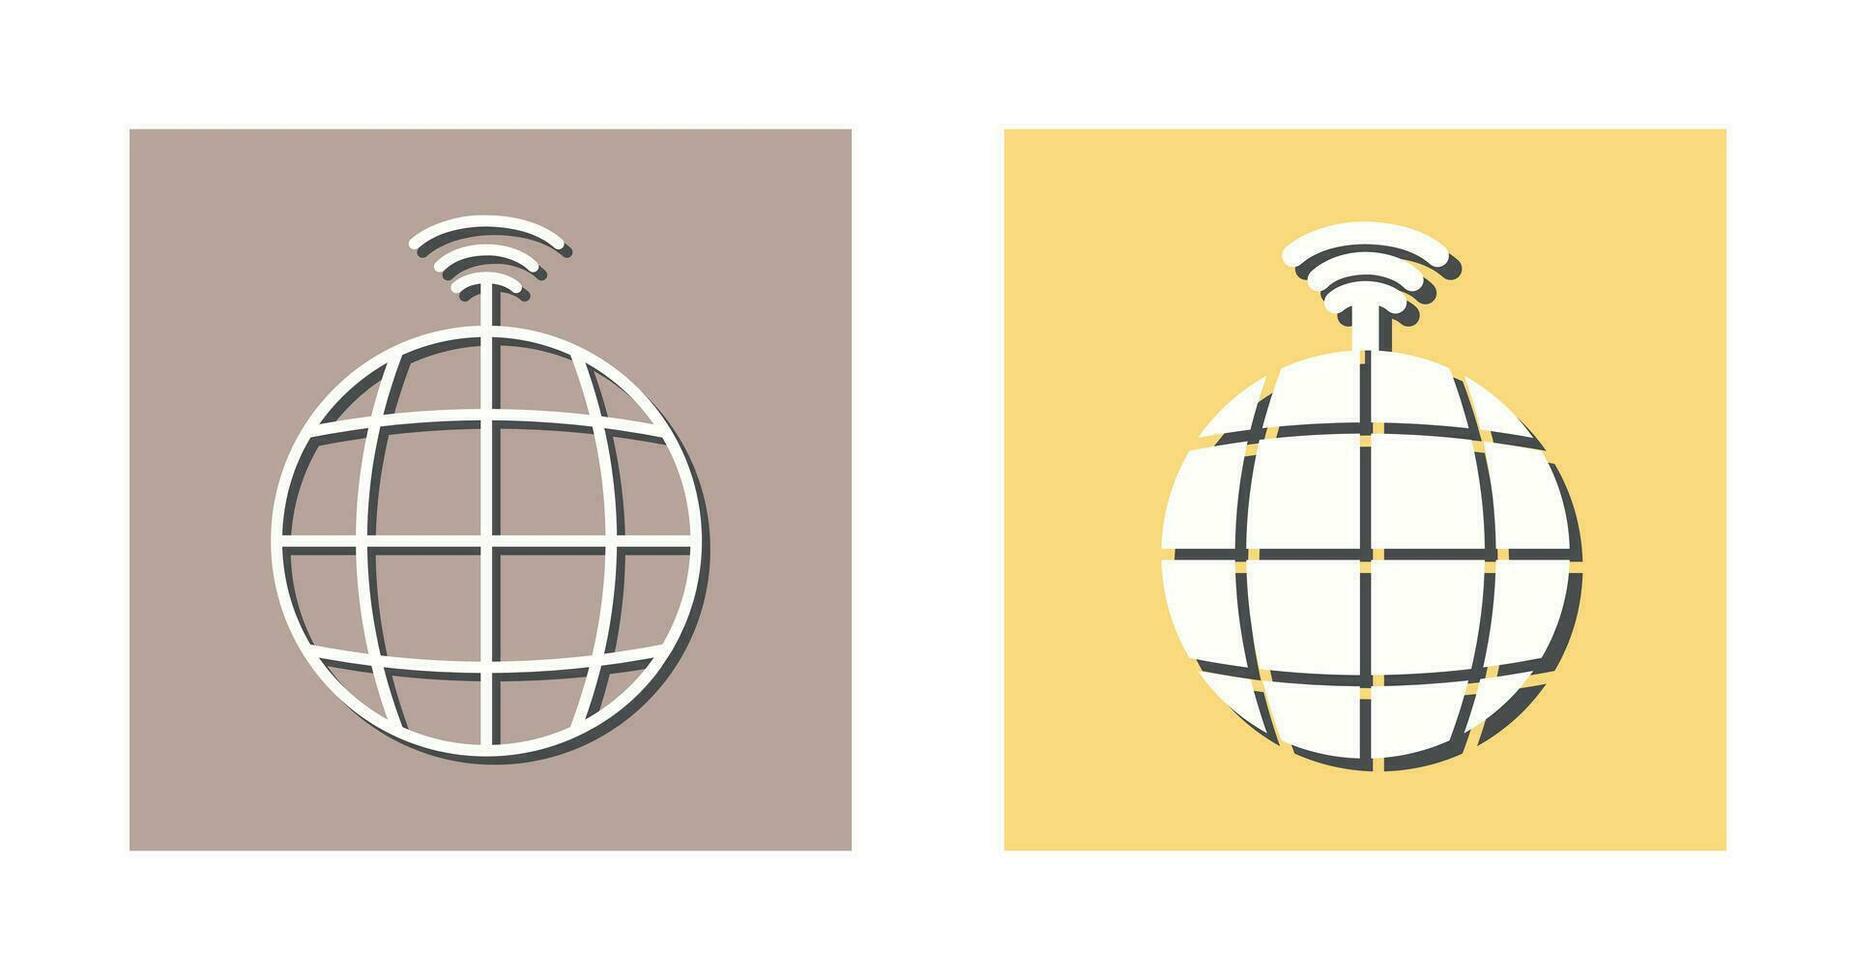 Global Signals Vector Icon